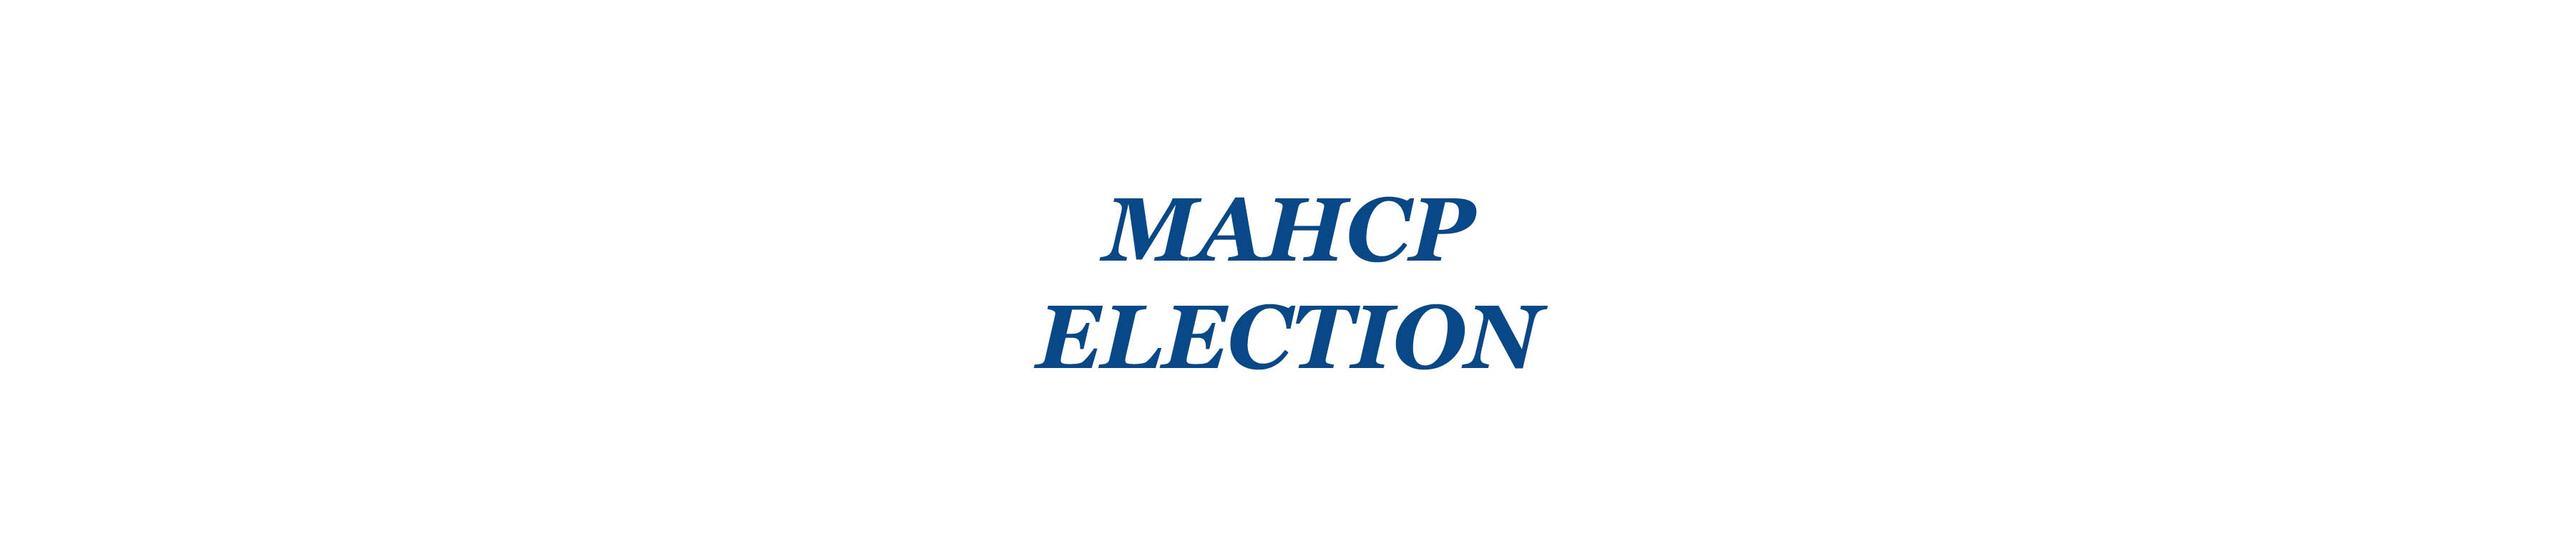 2017 MAHCP Vice Presidential election